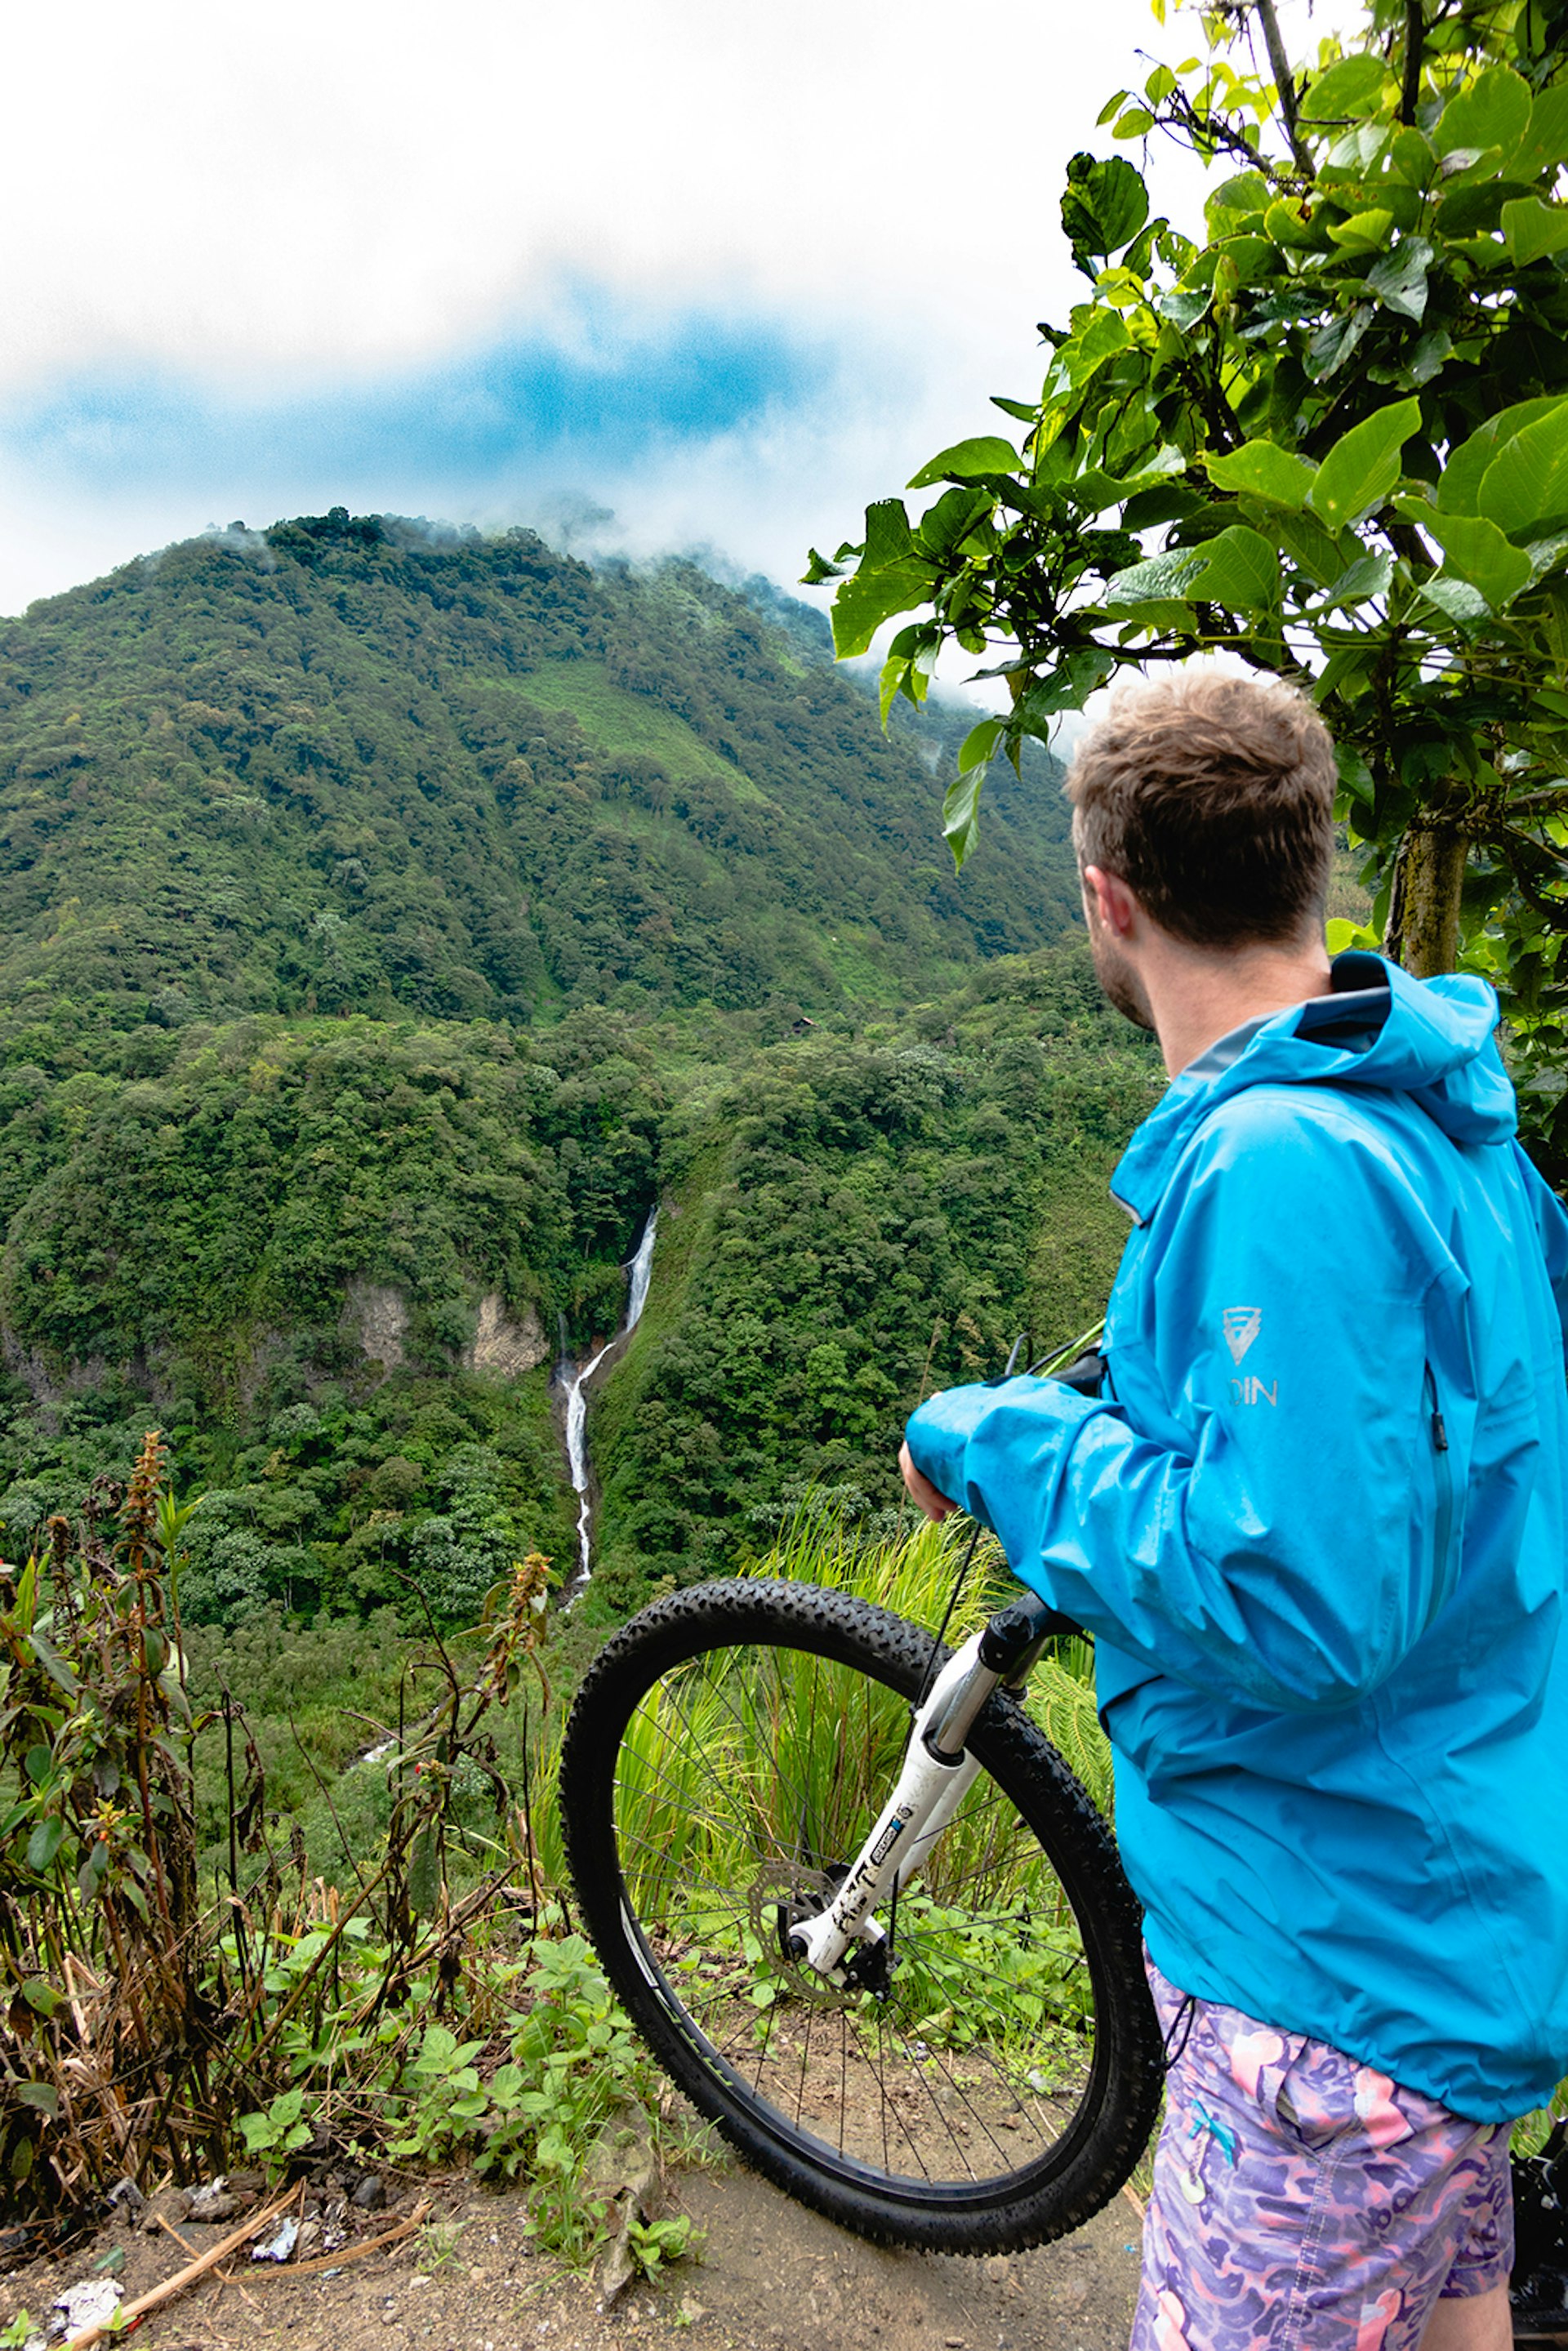 A man holds a bicycle and looks out over a green hill with a waterfall running in the middle.